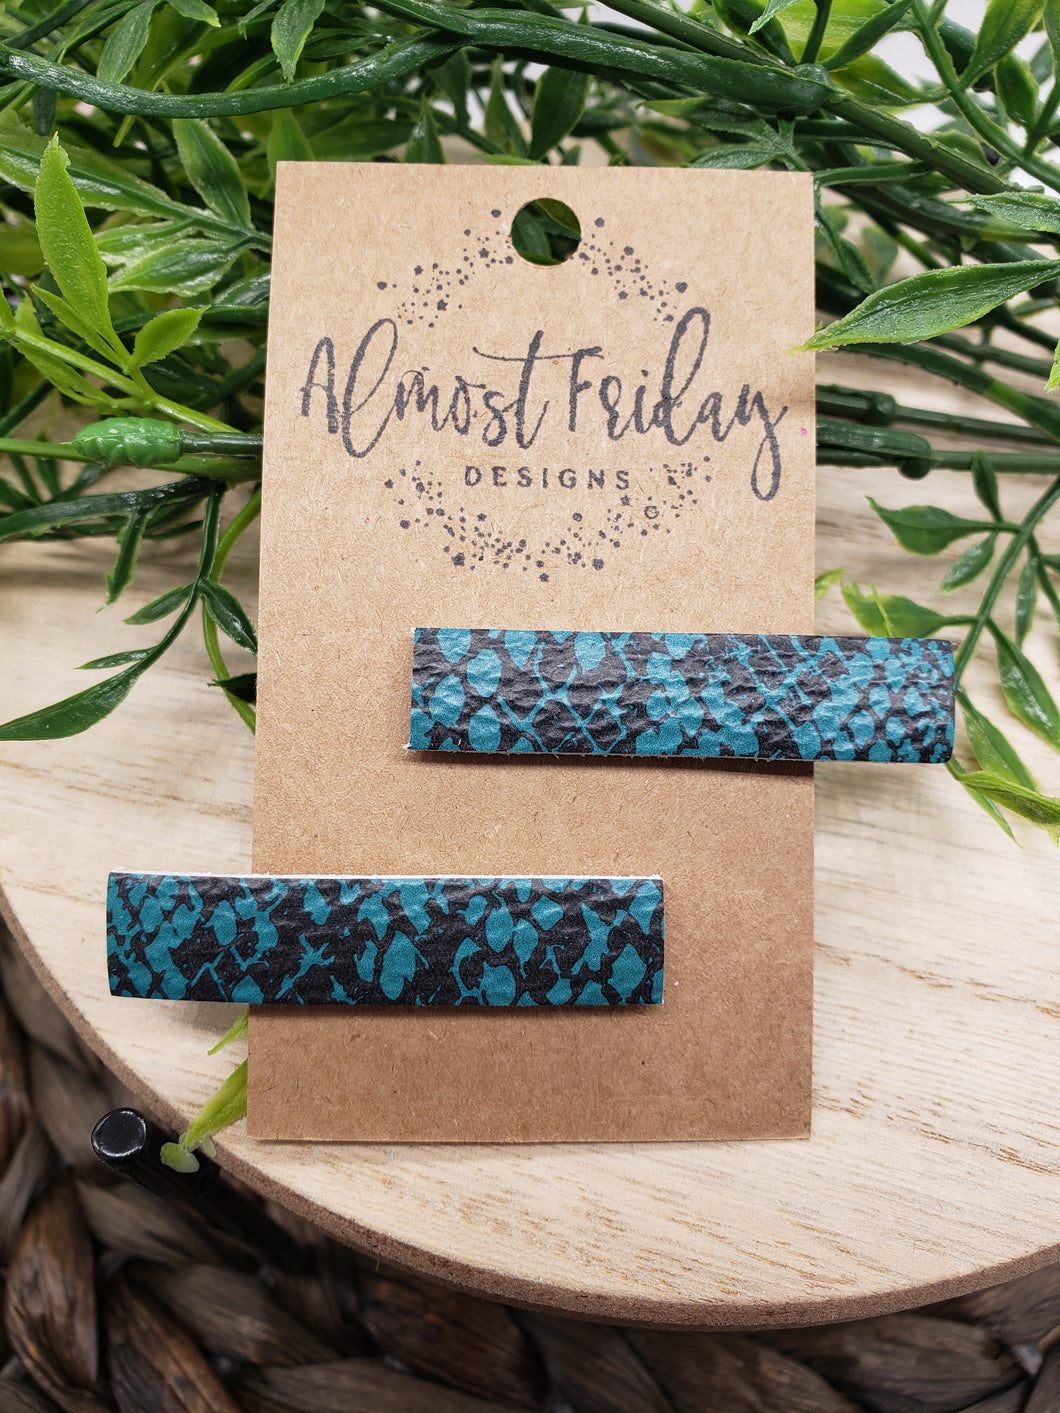 Genuine Leather Hair Clip - Snakeskin - Black and Teal - Hair Accessory  - Alligator Clip